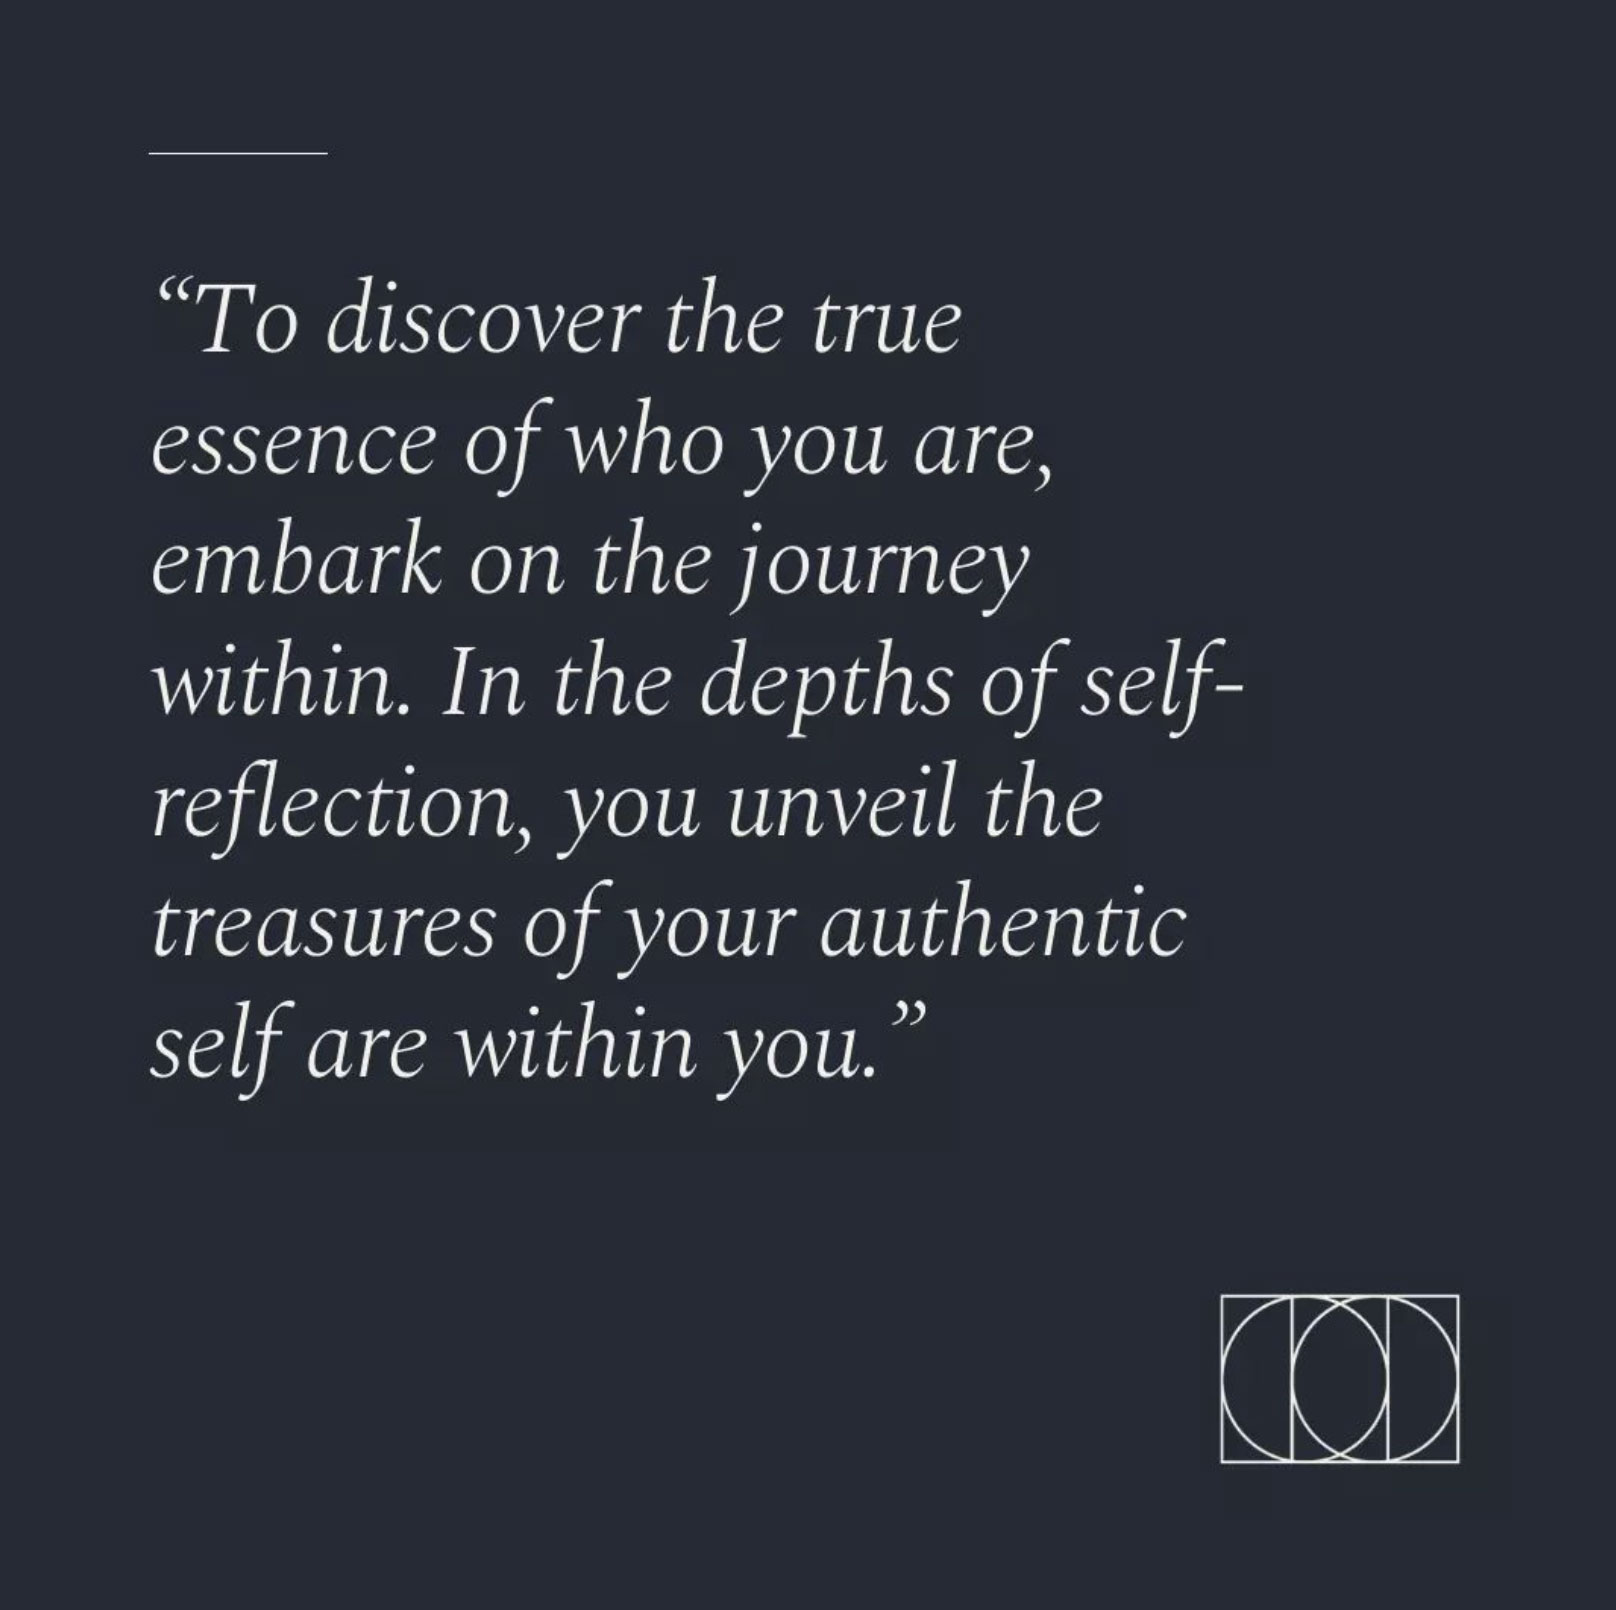 To discover the true essence quote